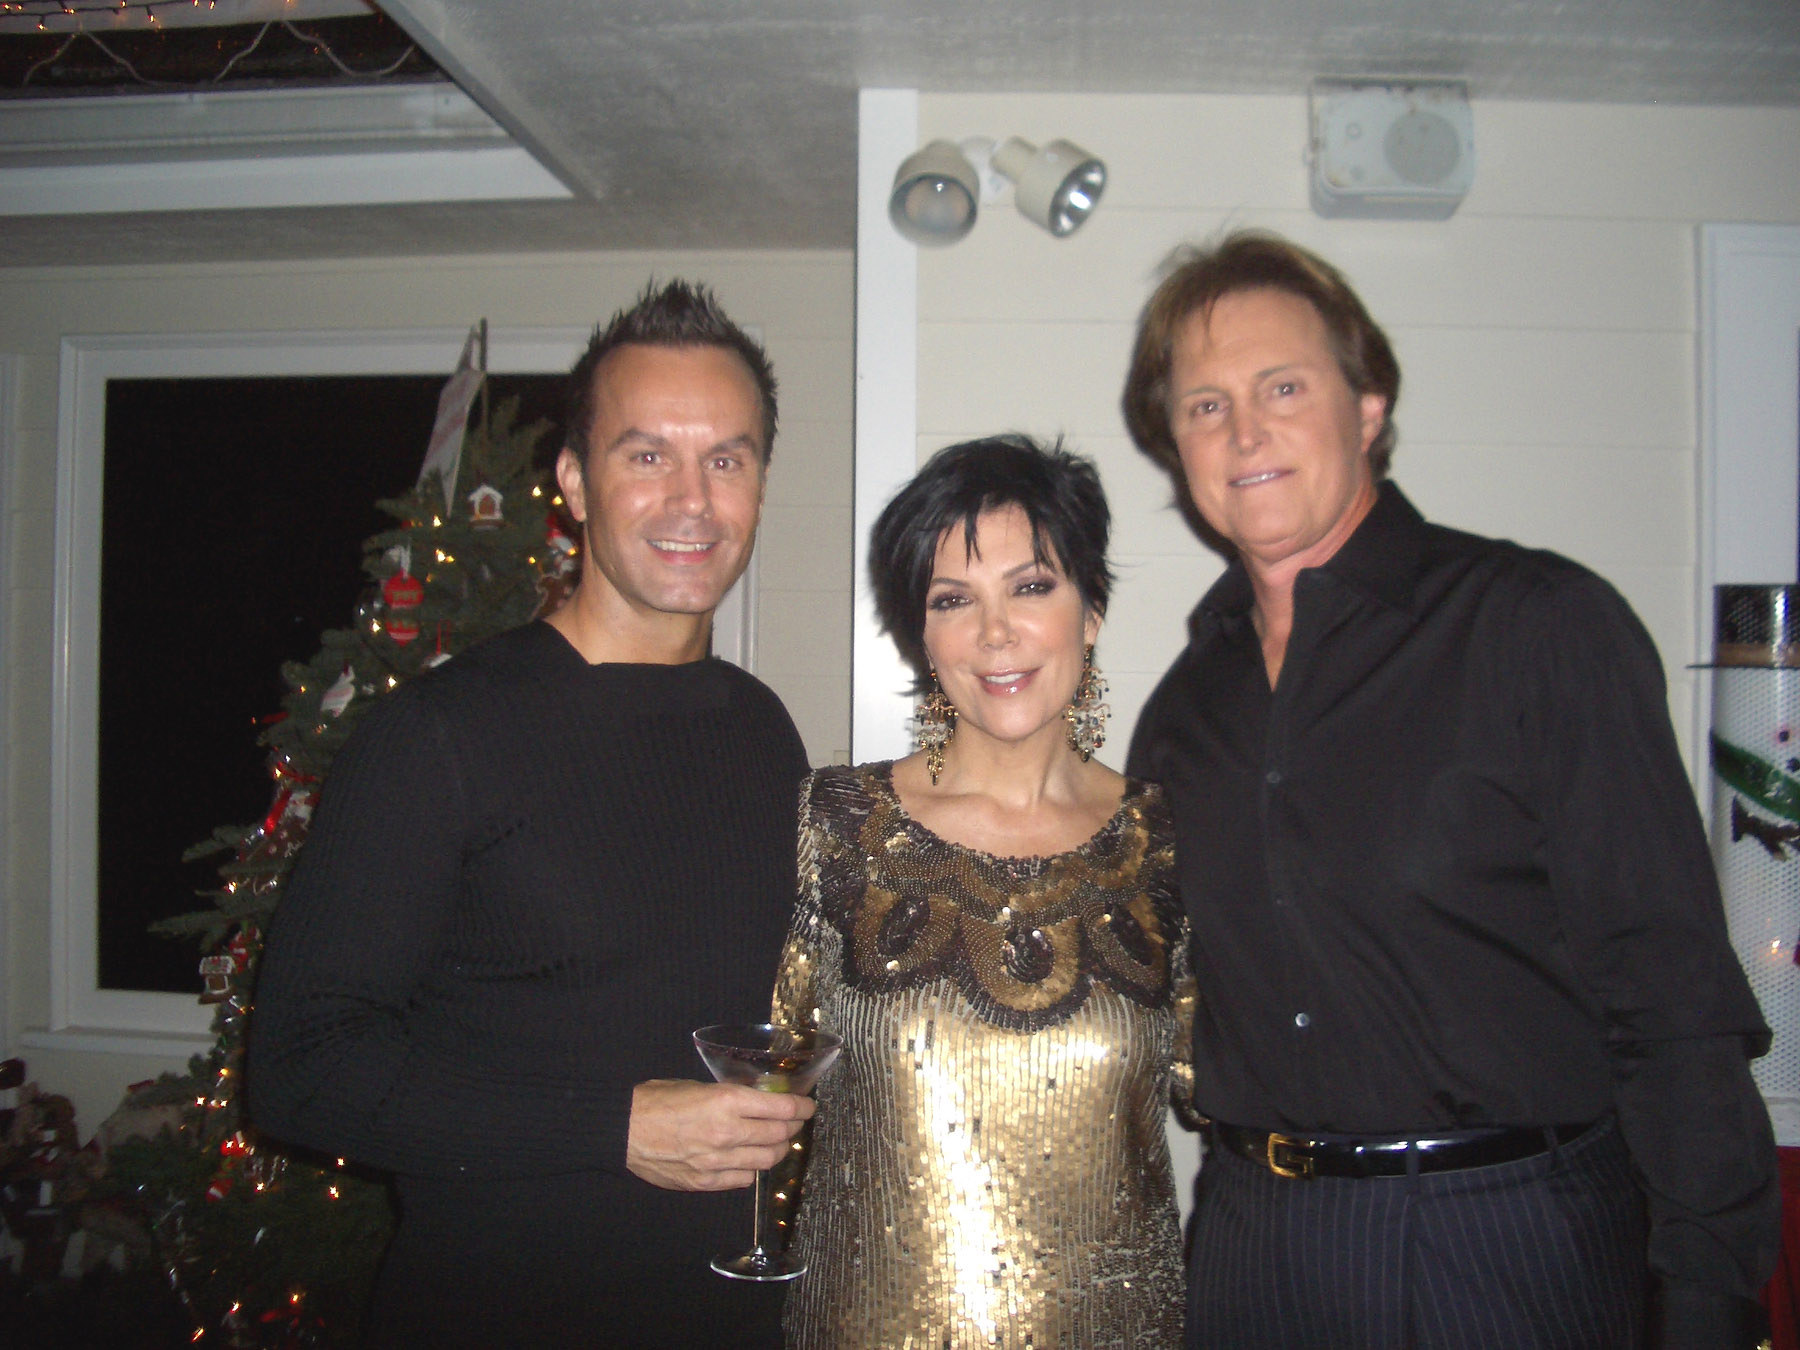 Mark Lund with Bruce and Kris Jenner on Christmas Eve.